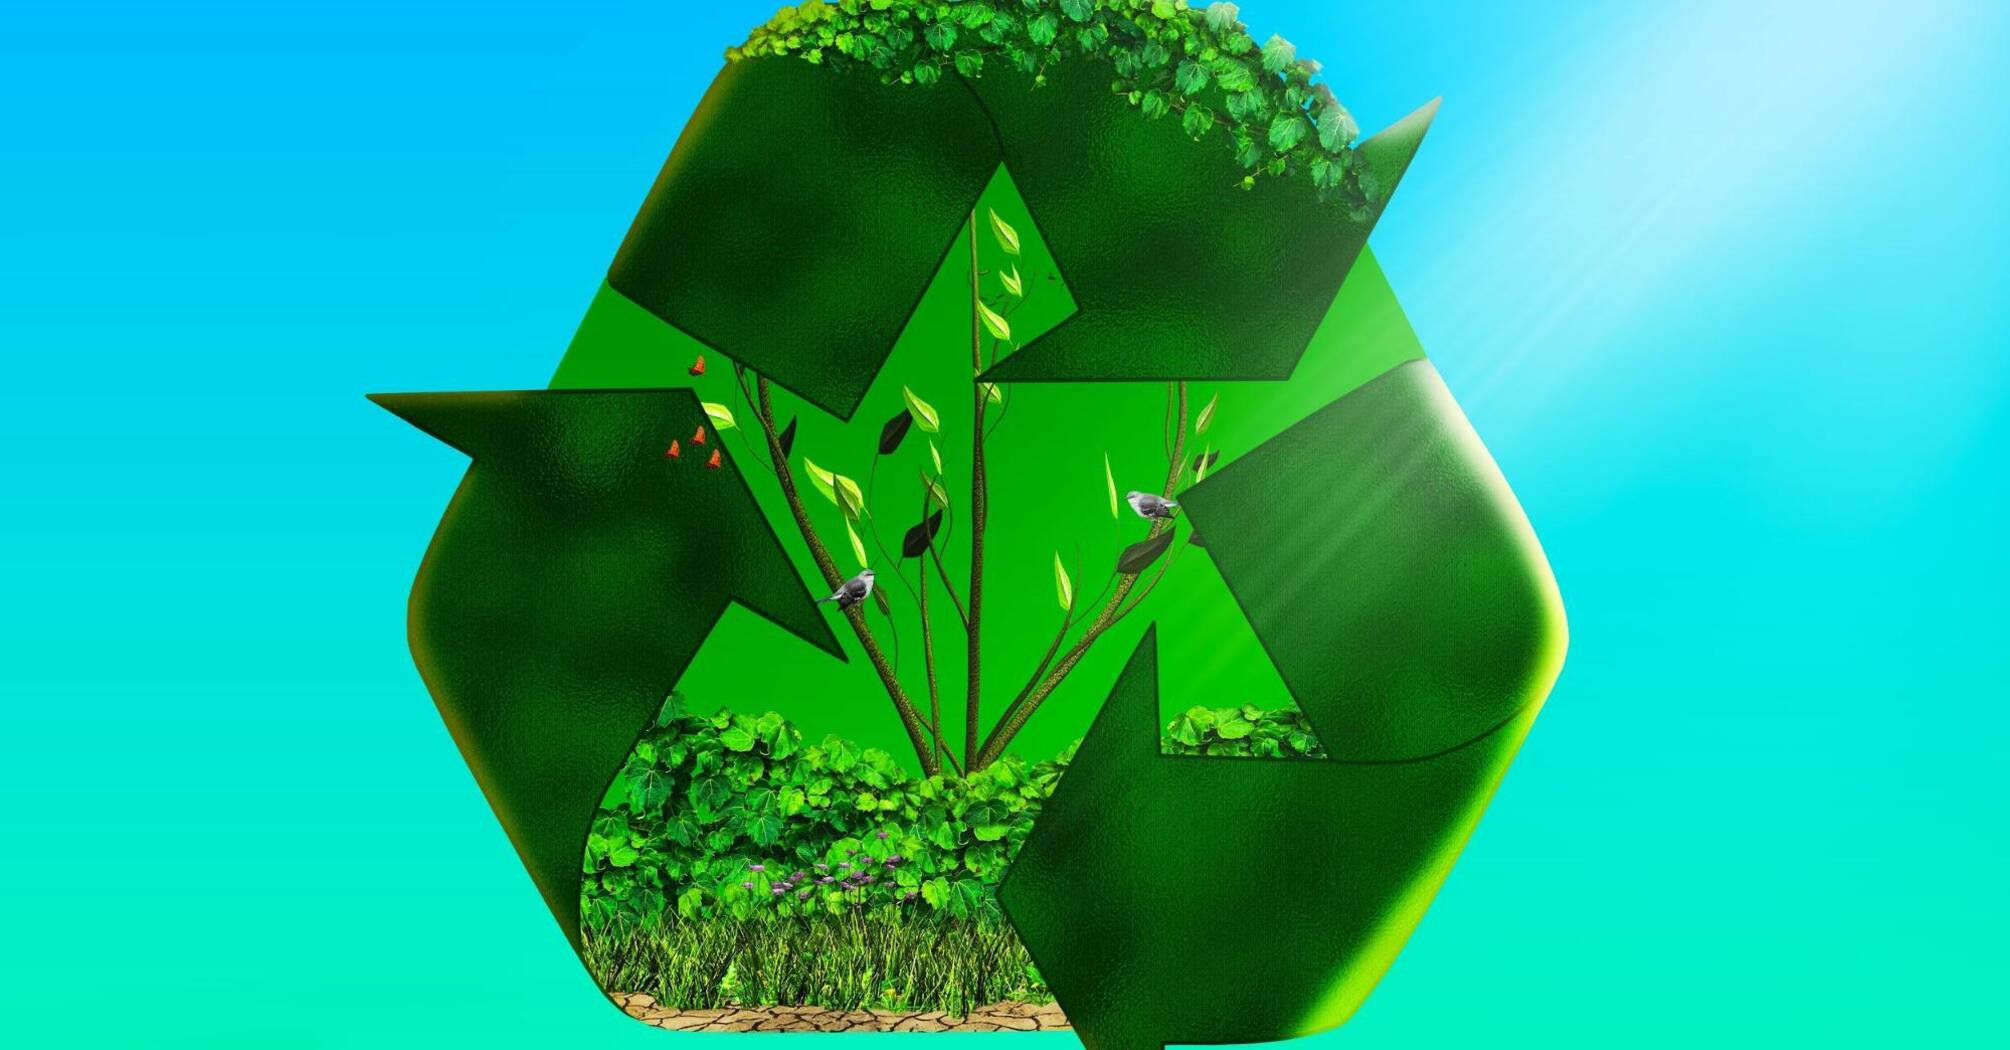 The recycling symbol filled with nature reflects the harmony of ecology and sustainable development